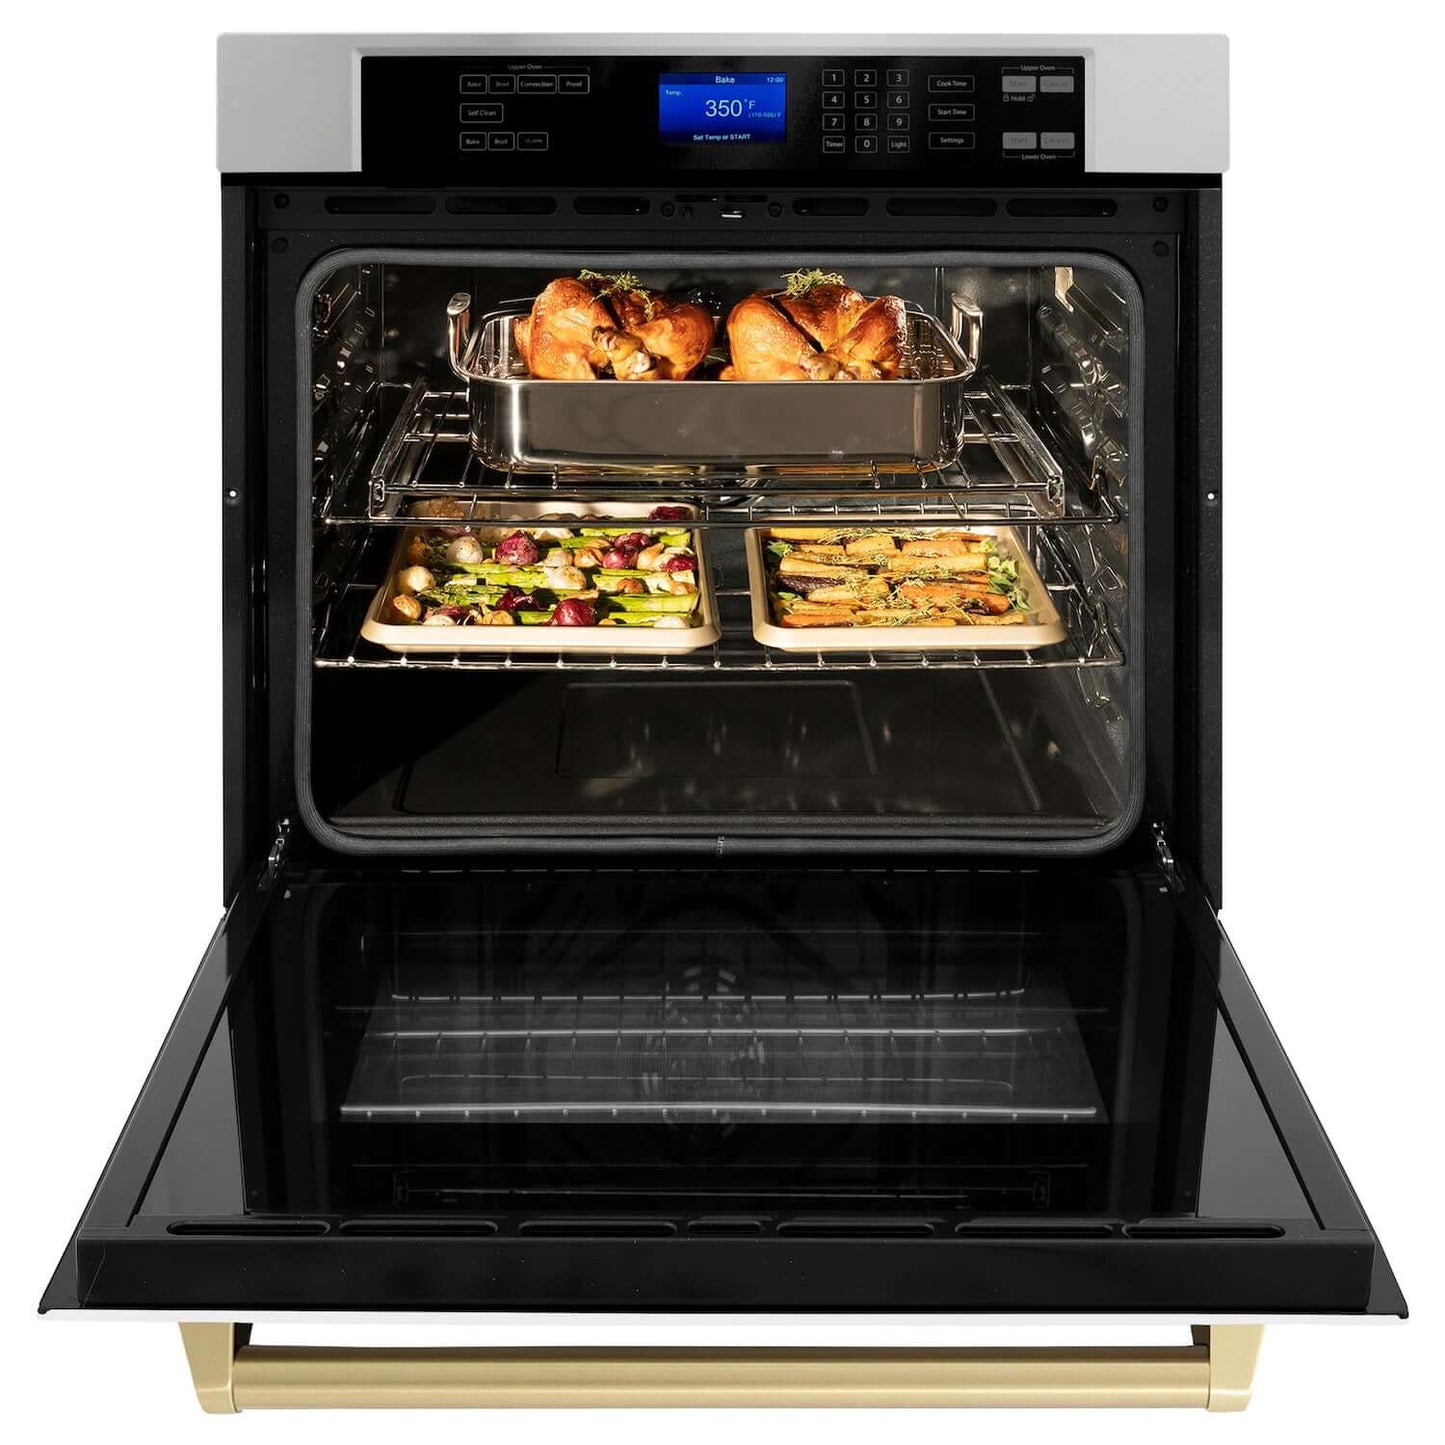 ZLINE 30 in. Autograph Edition Electric Single Wall Oven with Self Clean and True Convection in Stainless Steel and Matte Black Accents (AWSZ-30-MB)